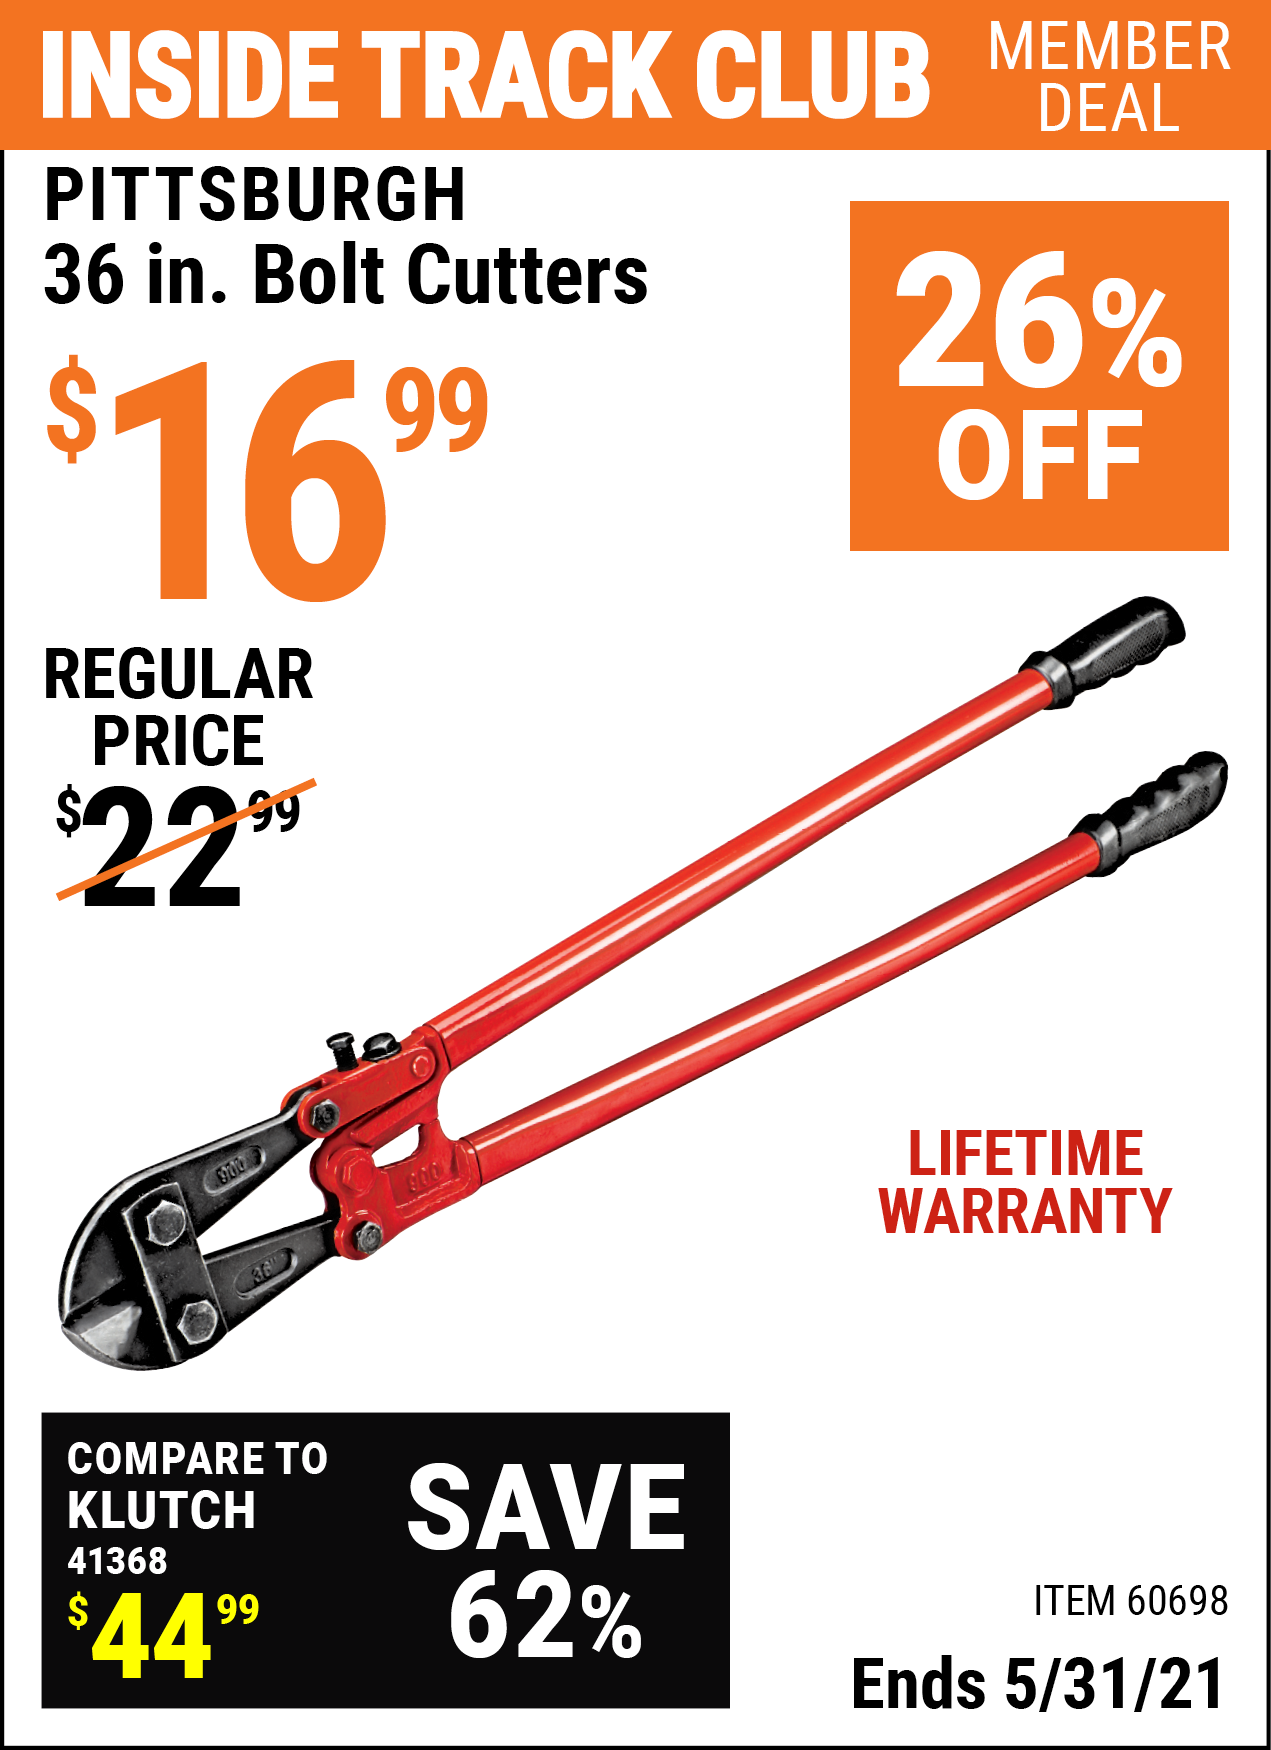 Inside Track Club members can buy the PITTSBURGH 36 in. Bolt Cutters (Item 60698) for $16.99, valid through 5/31/2021.